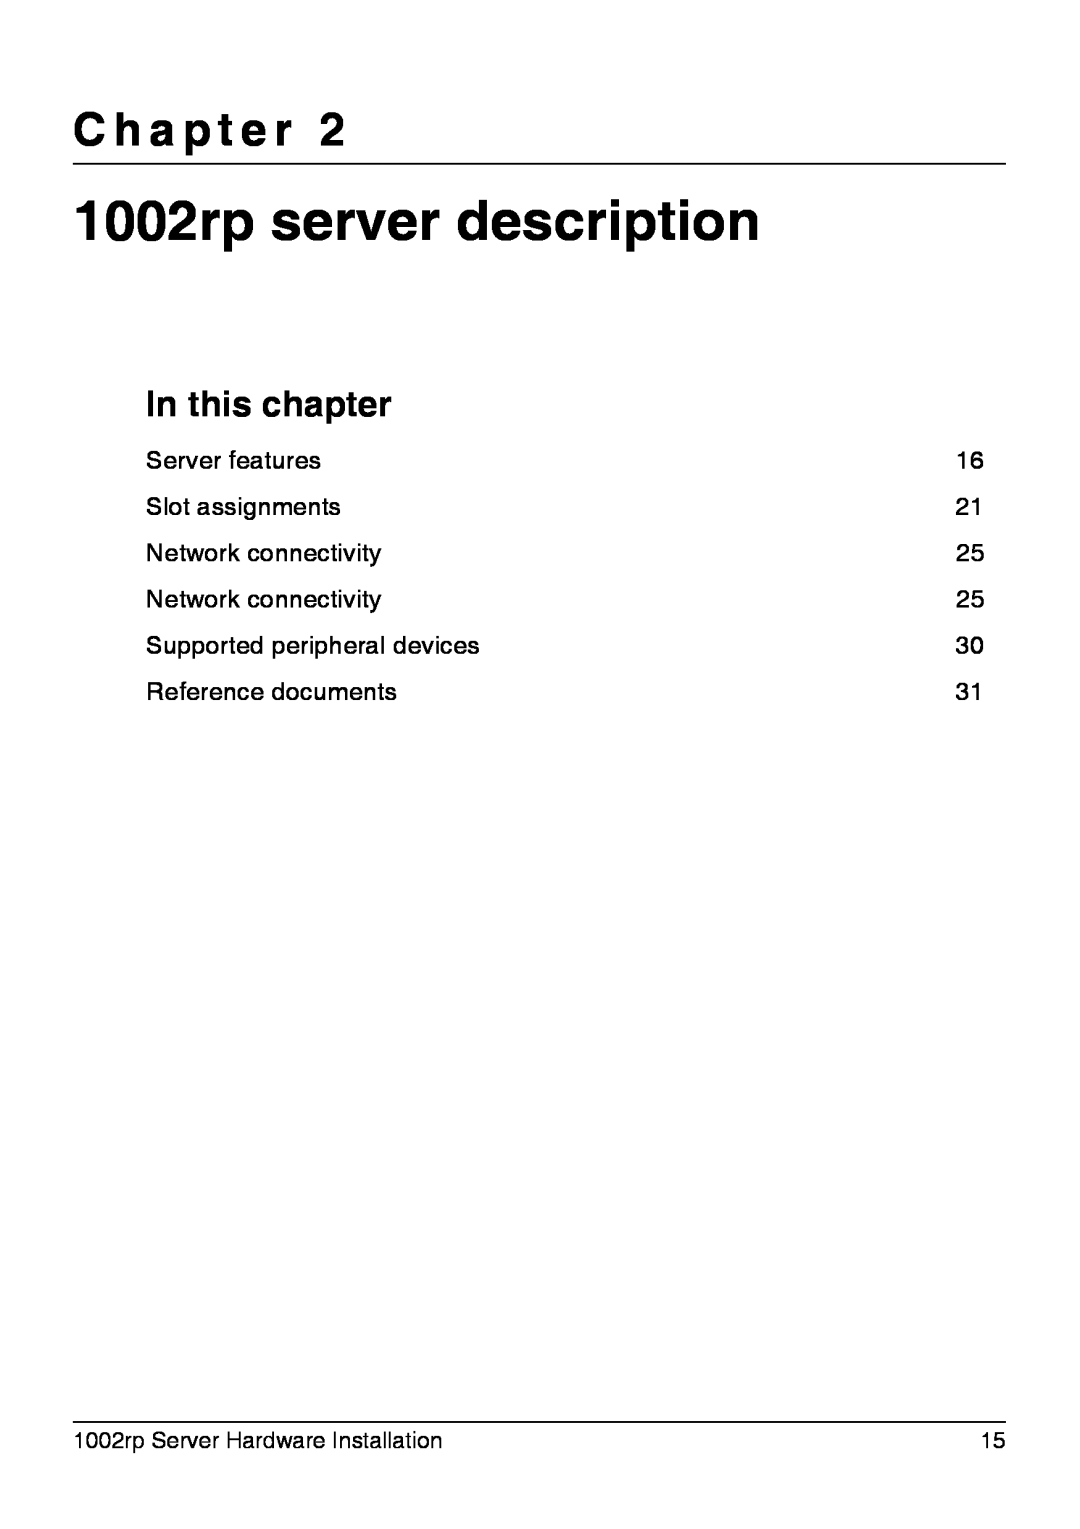 Nortel Networks manual 1002rp server description, In this chapter, C h a p t e r 